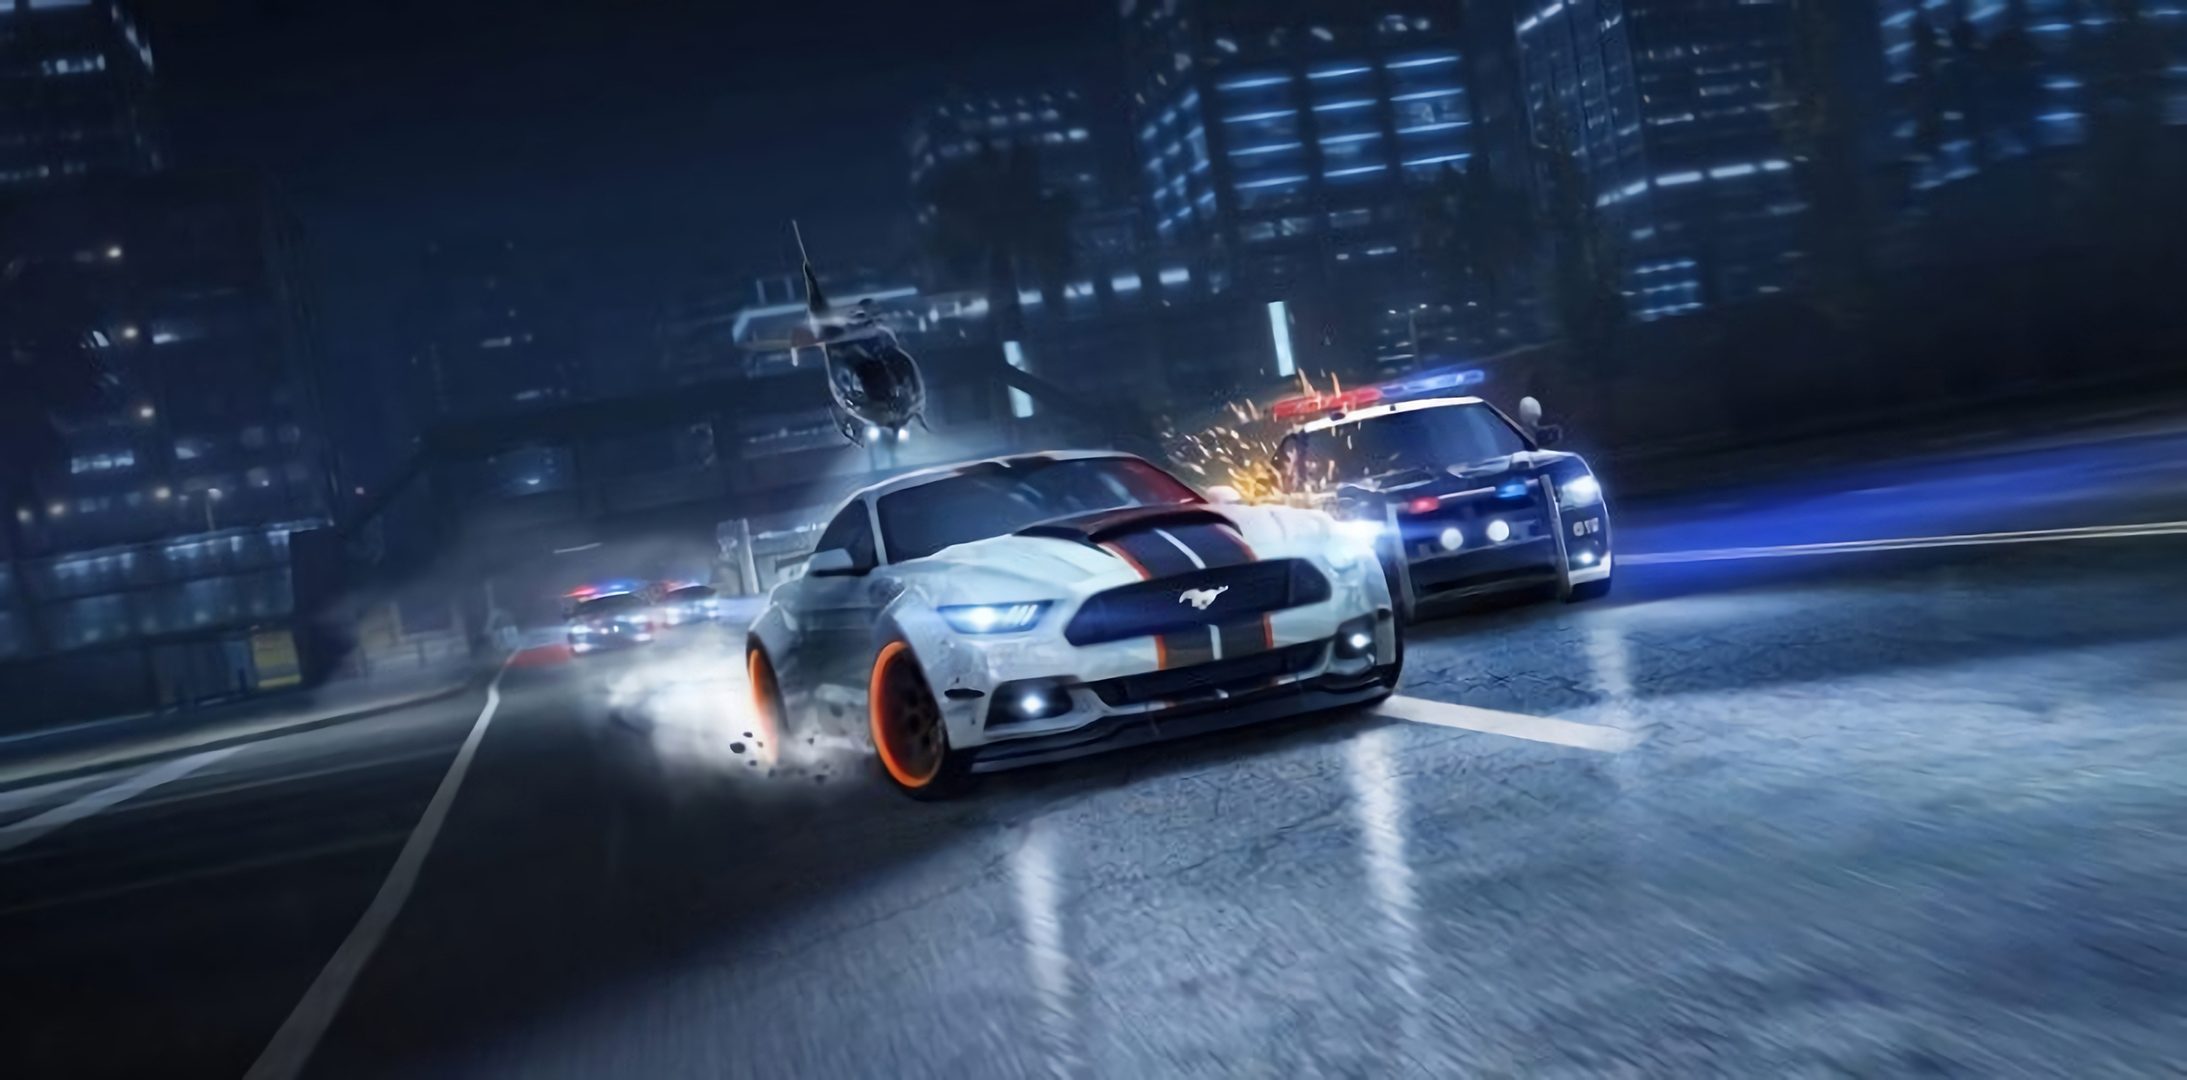 Wallpaper need for speed heat cars racing game desktop wallpaper hd  image picture background 2d2cb6  wallpapersmug